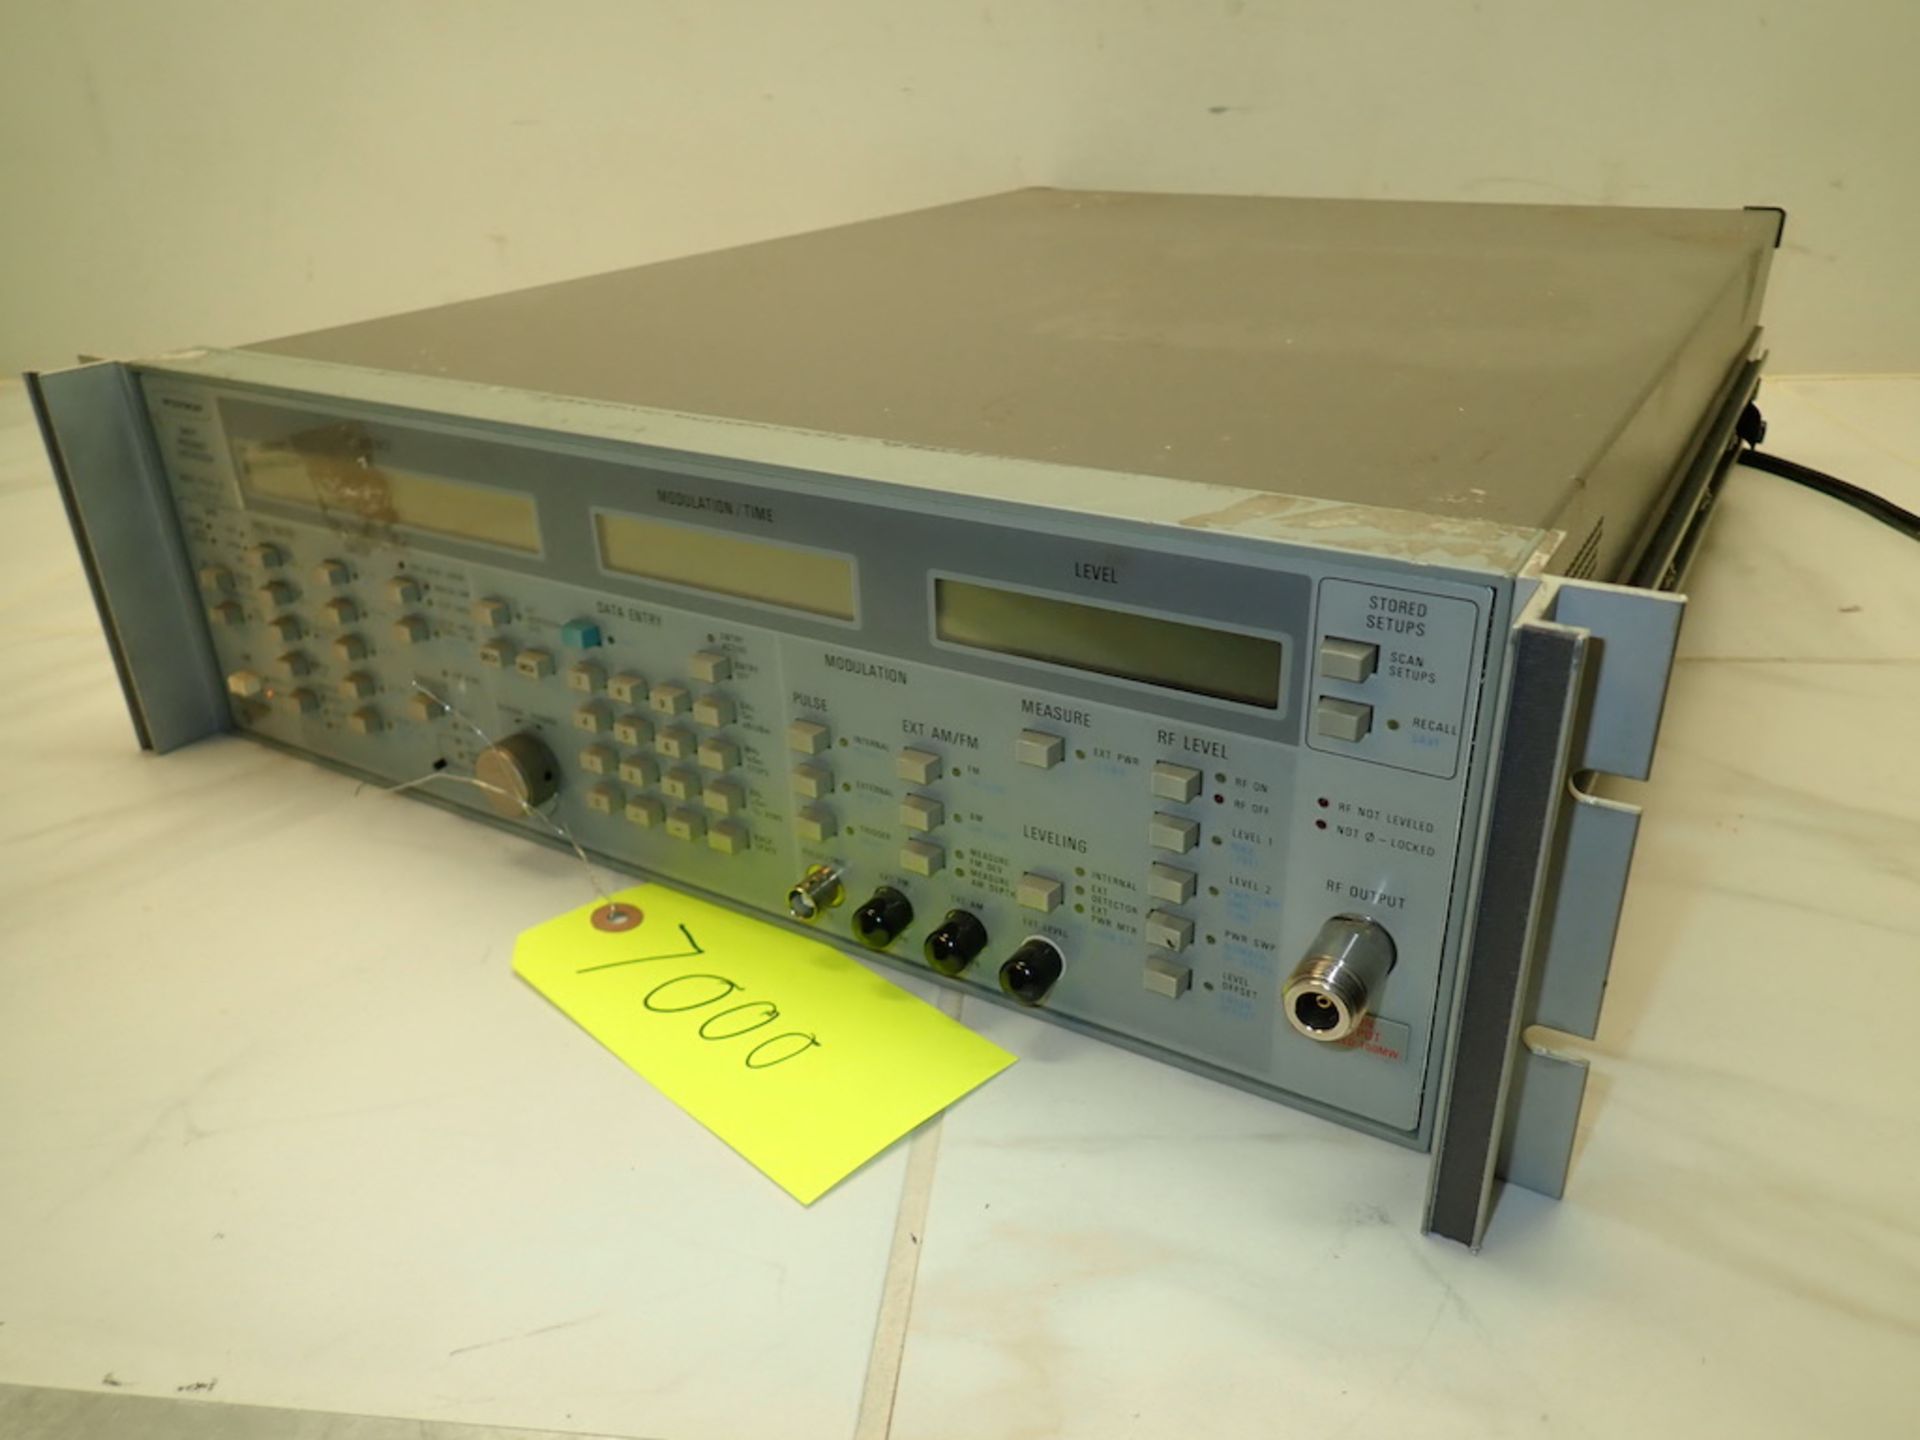 Wiltron Swept Frequency Synthesizer, Model 6737B-20, 2-20Ghz